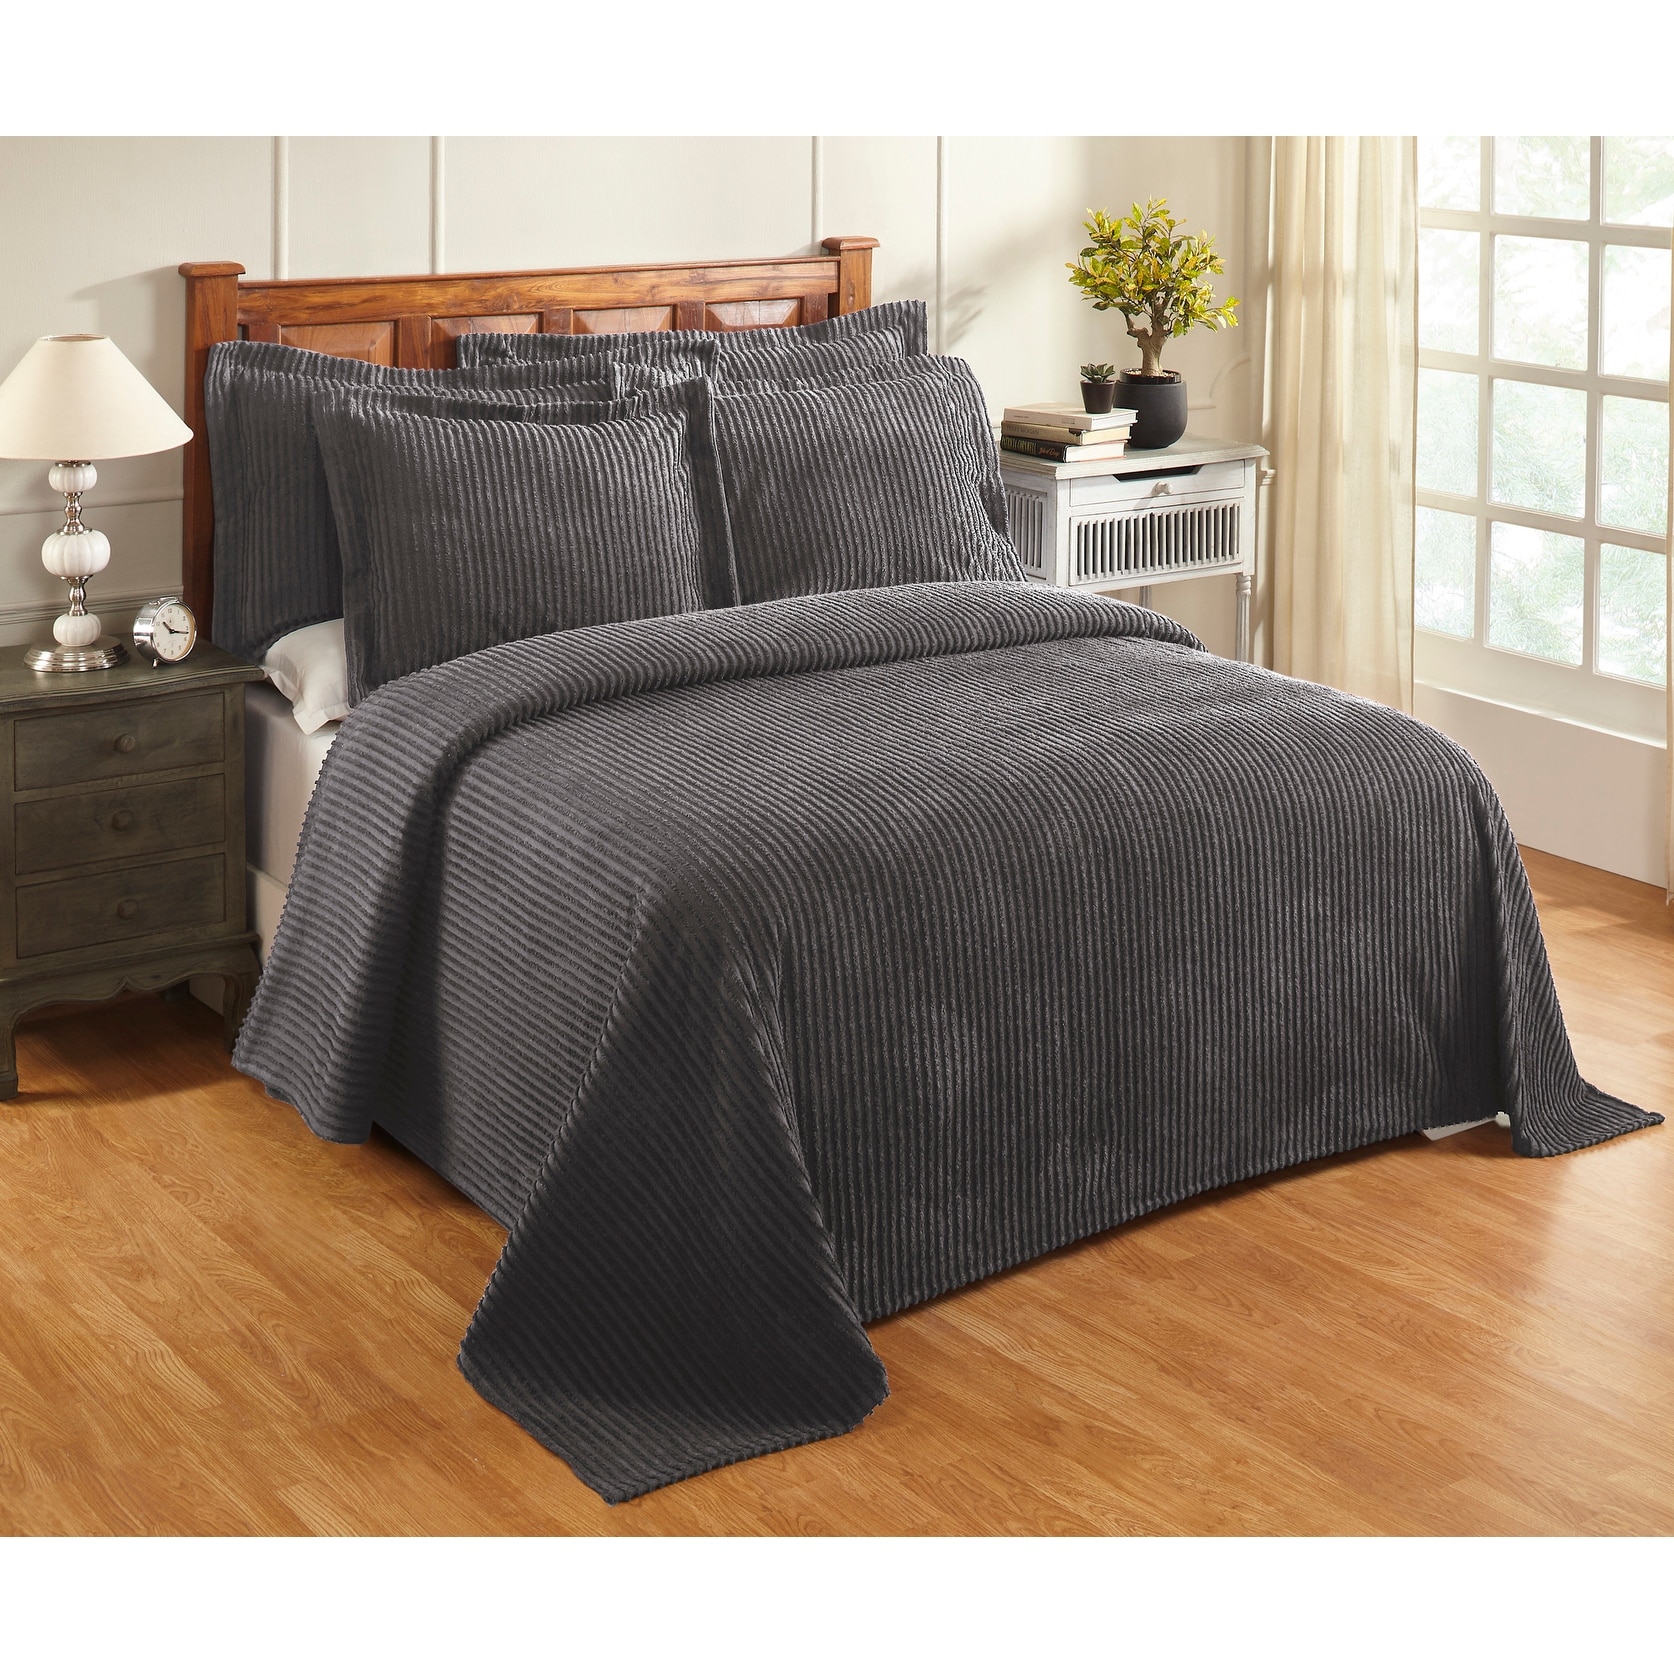 Better Trends Rio 100% Cotton Tufted Chenille Bedspread Assorted Sizes Colors